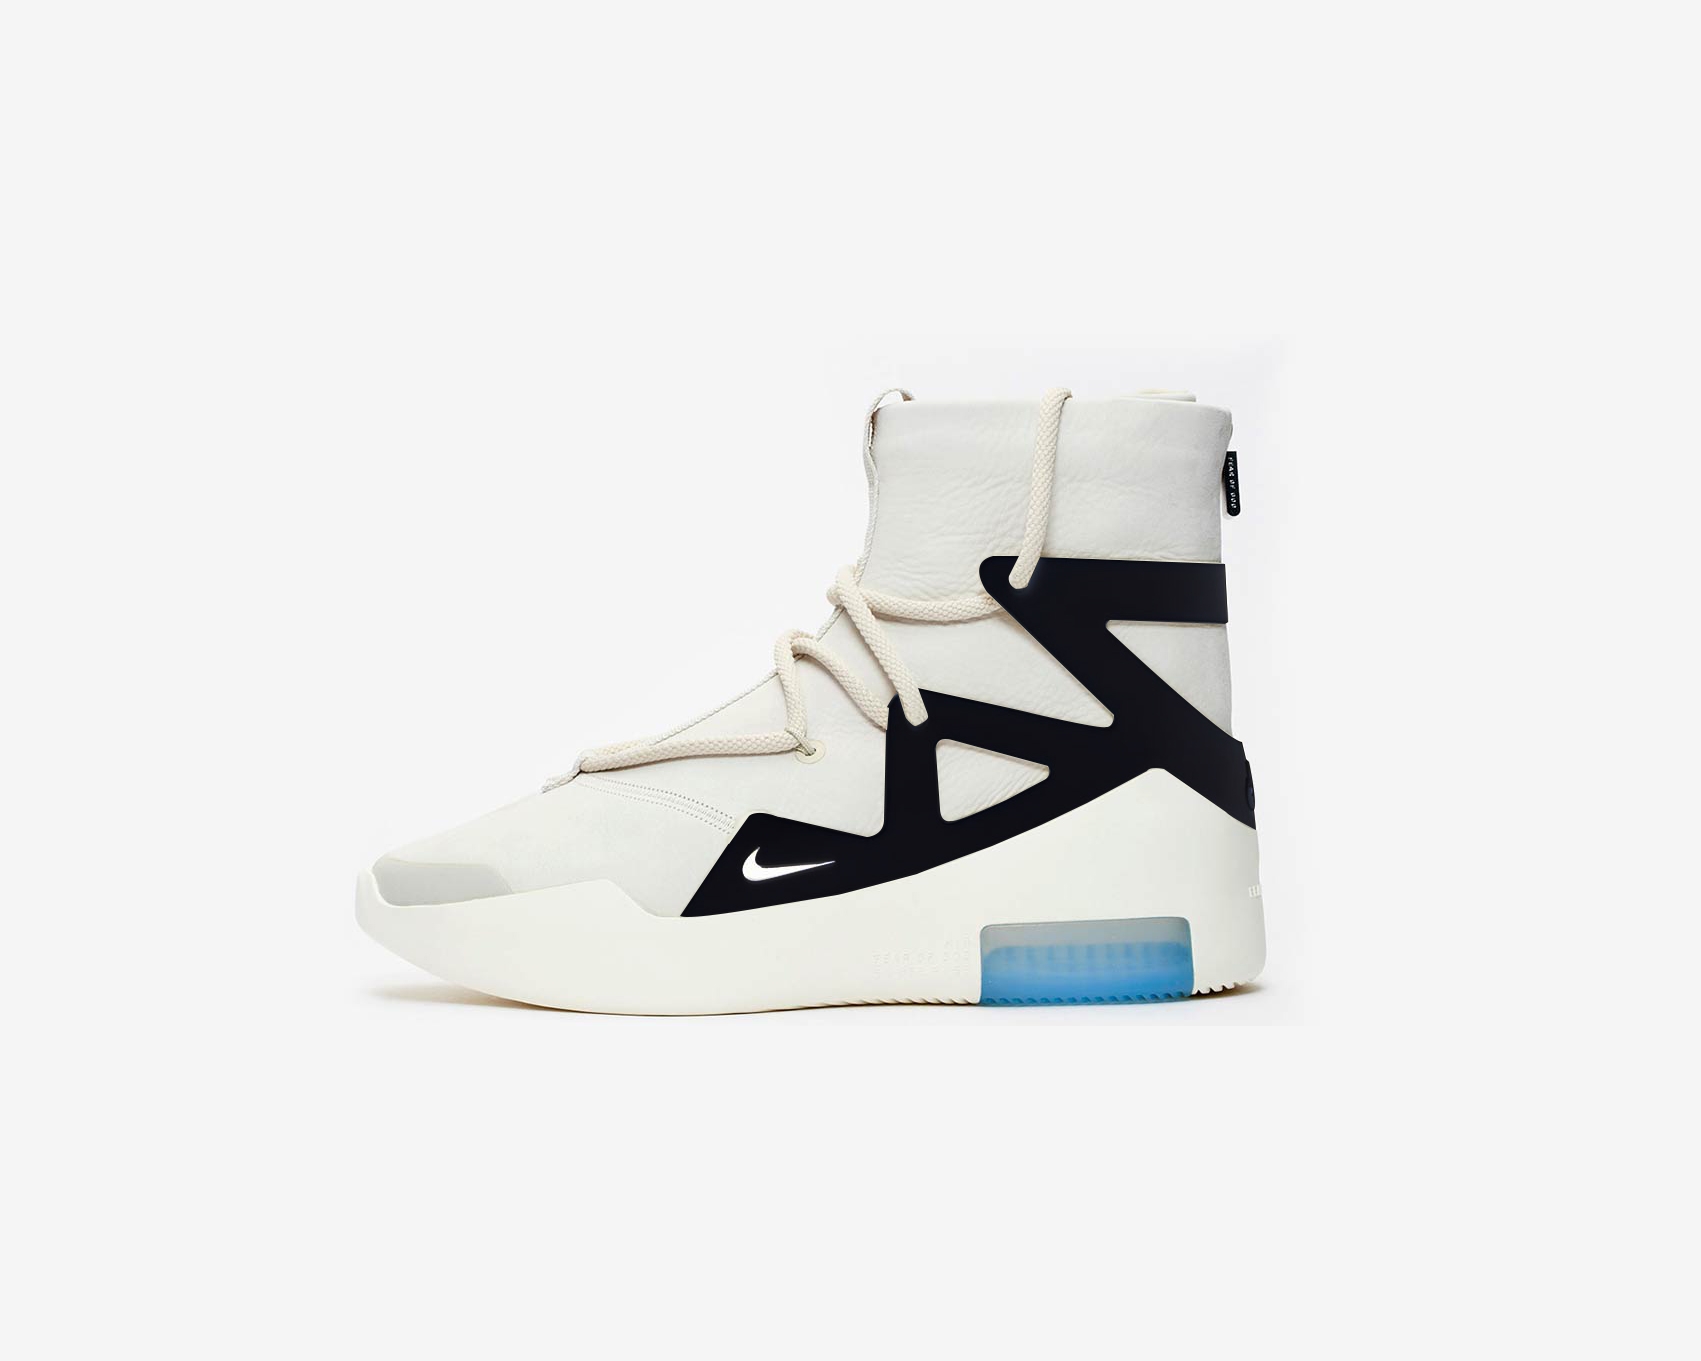 fear of god 1 colorways